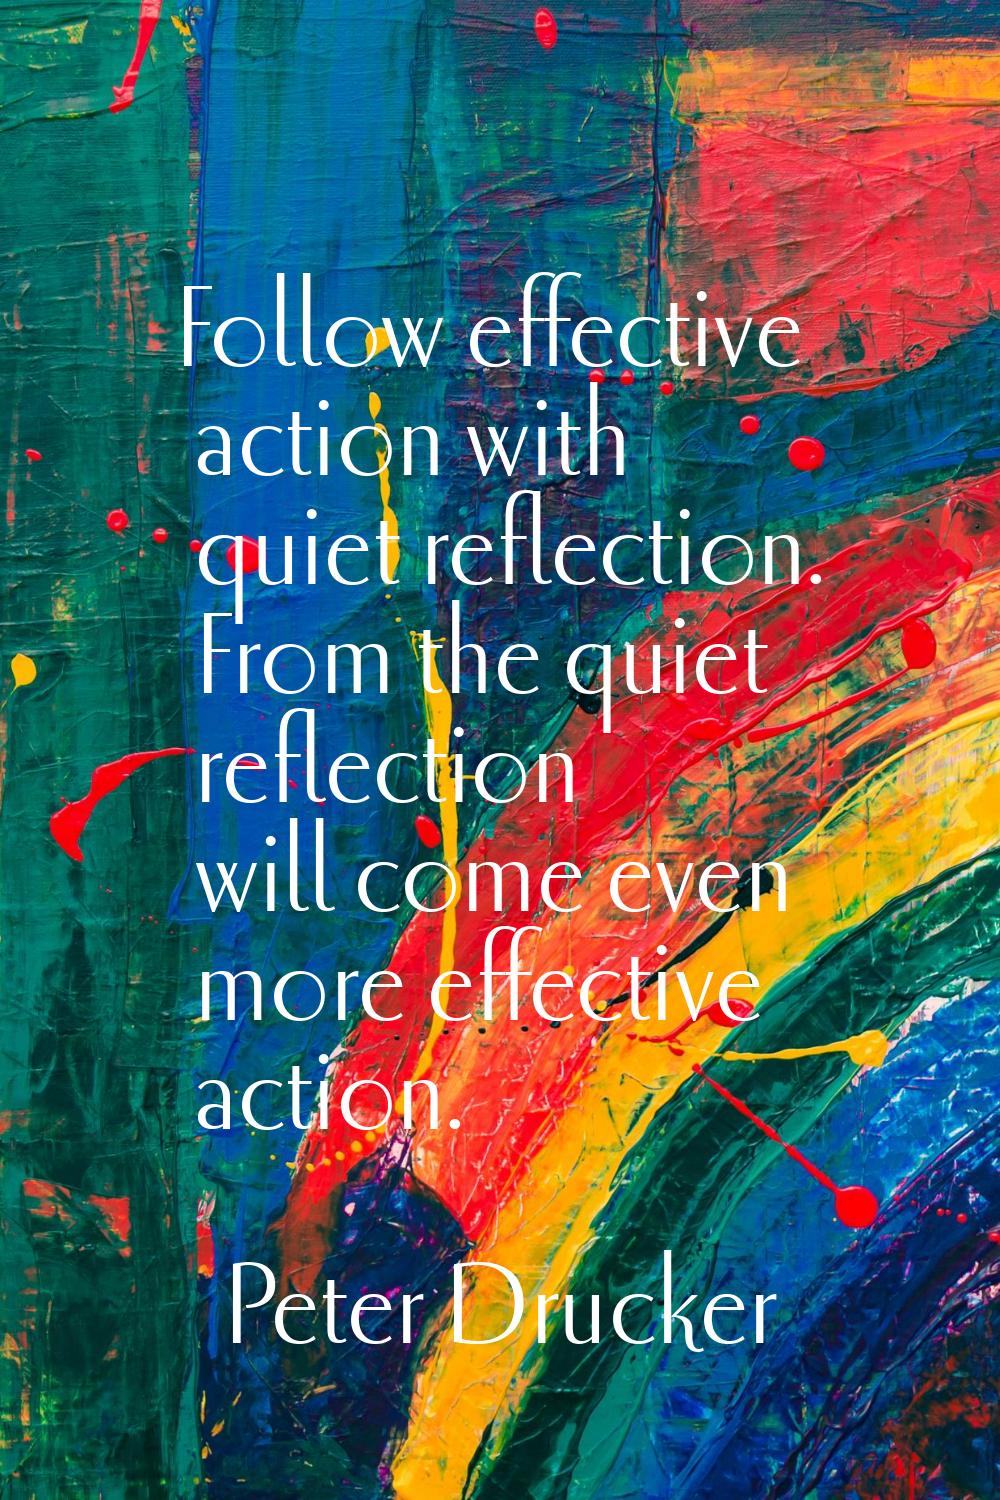 Follow effective action with quiet reflection. From the quiet reflection will come even more effect